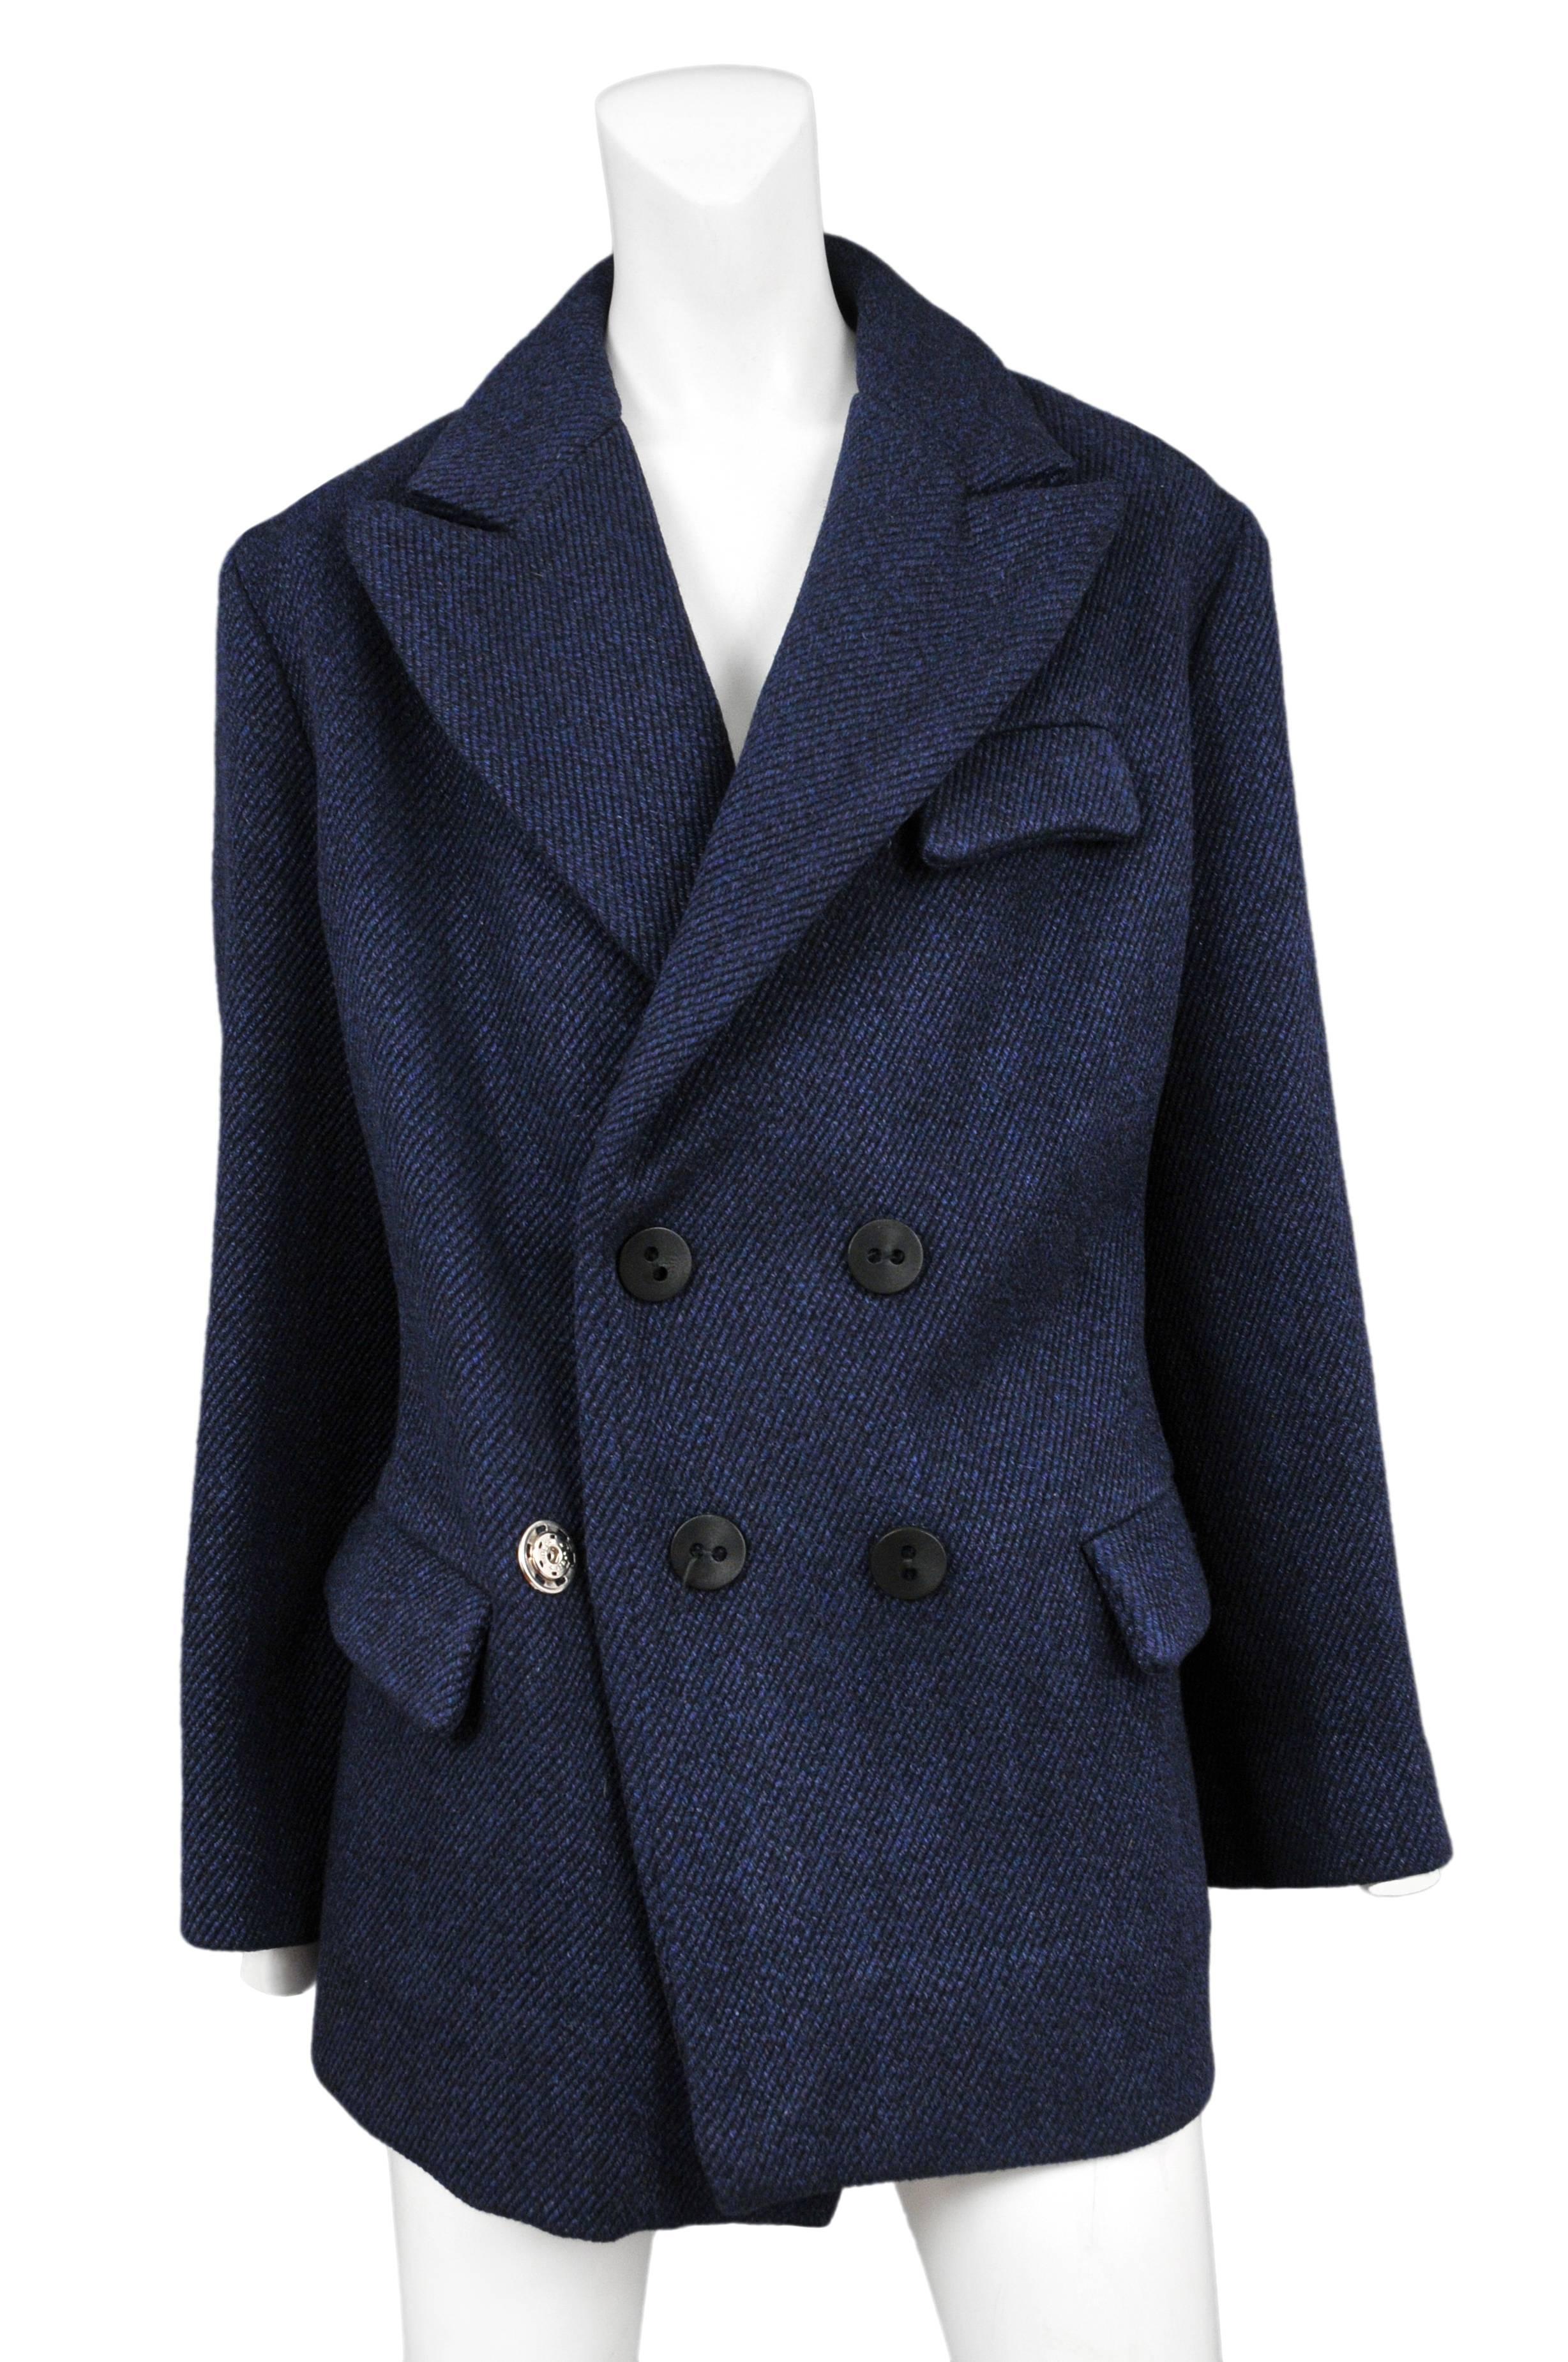 Vintage Maison Martin Margiela blue wool oversized jacket with large snaps at front and breast and side pockets. From the Doll Collection Autumn / Winter 1994-95.

Please inquire for additional images.